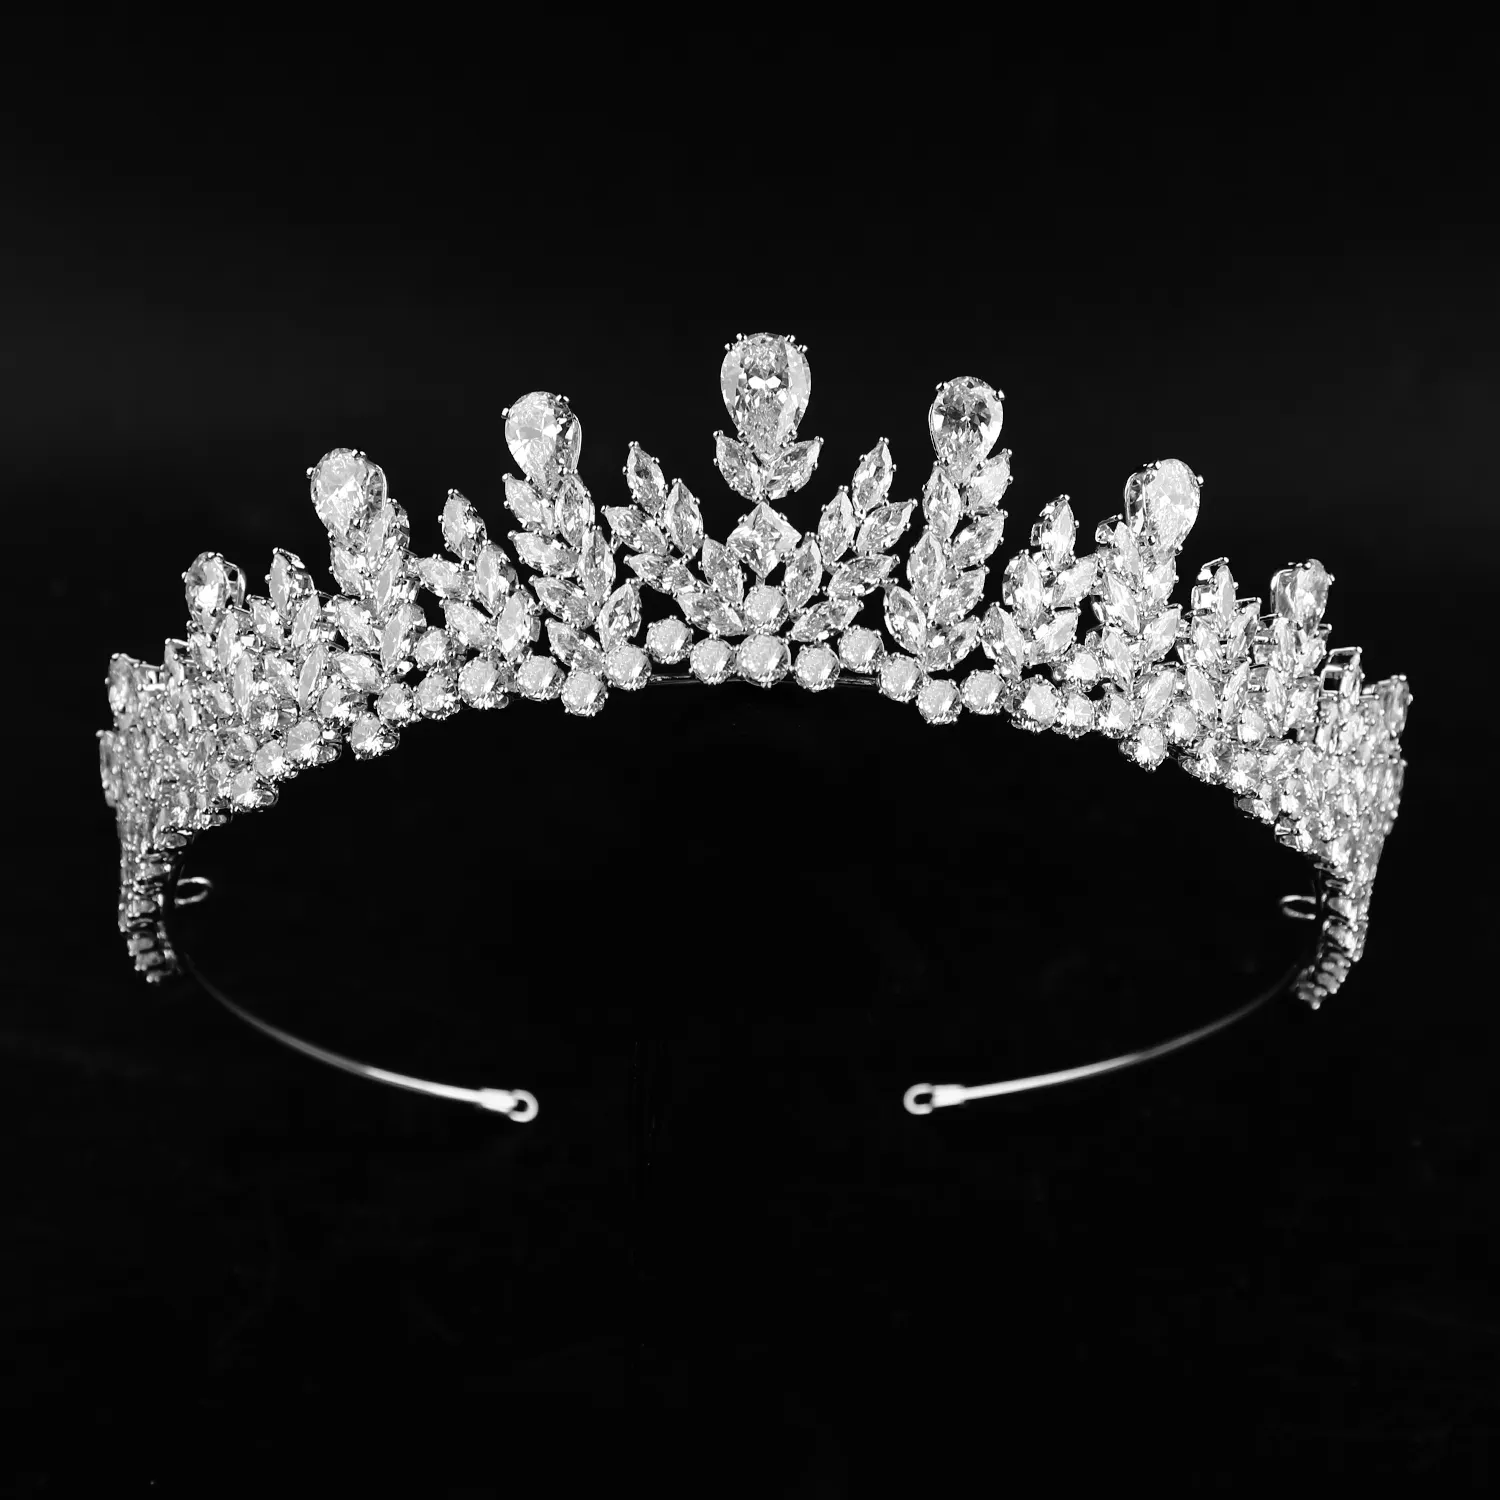 Wholesale High Quality AAA Zircon Crown for Wedding Hair Accessories Jewelry Bridal Tiaras and Crowns